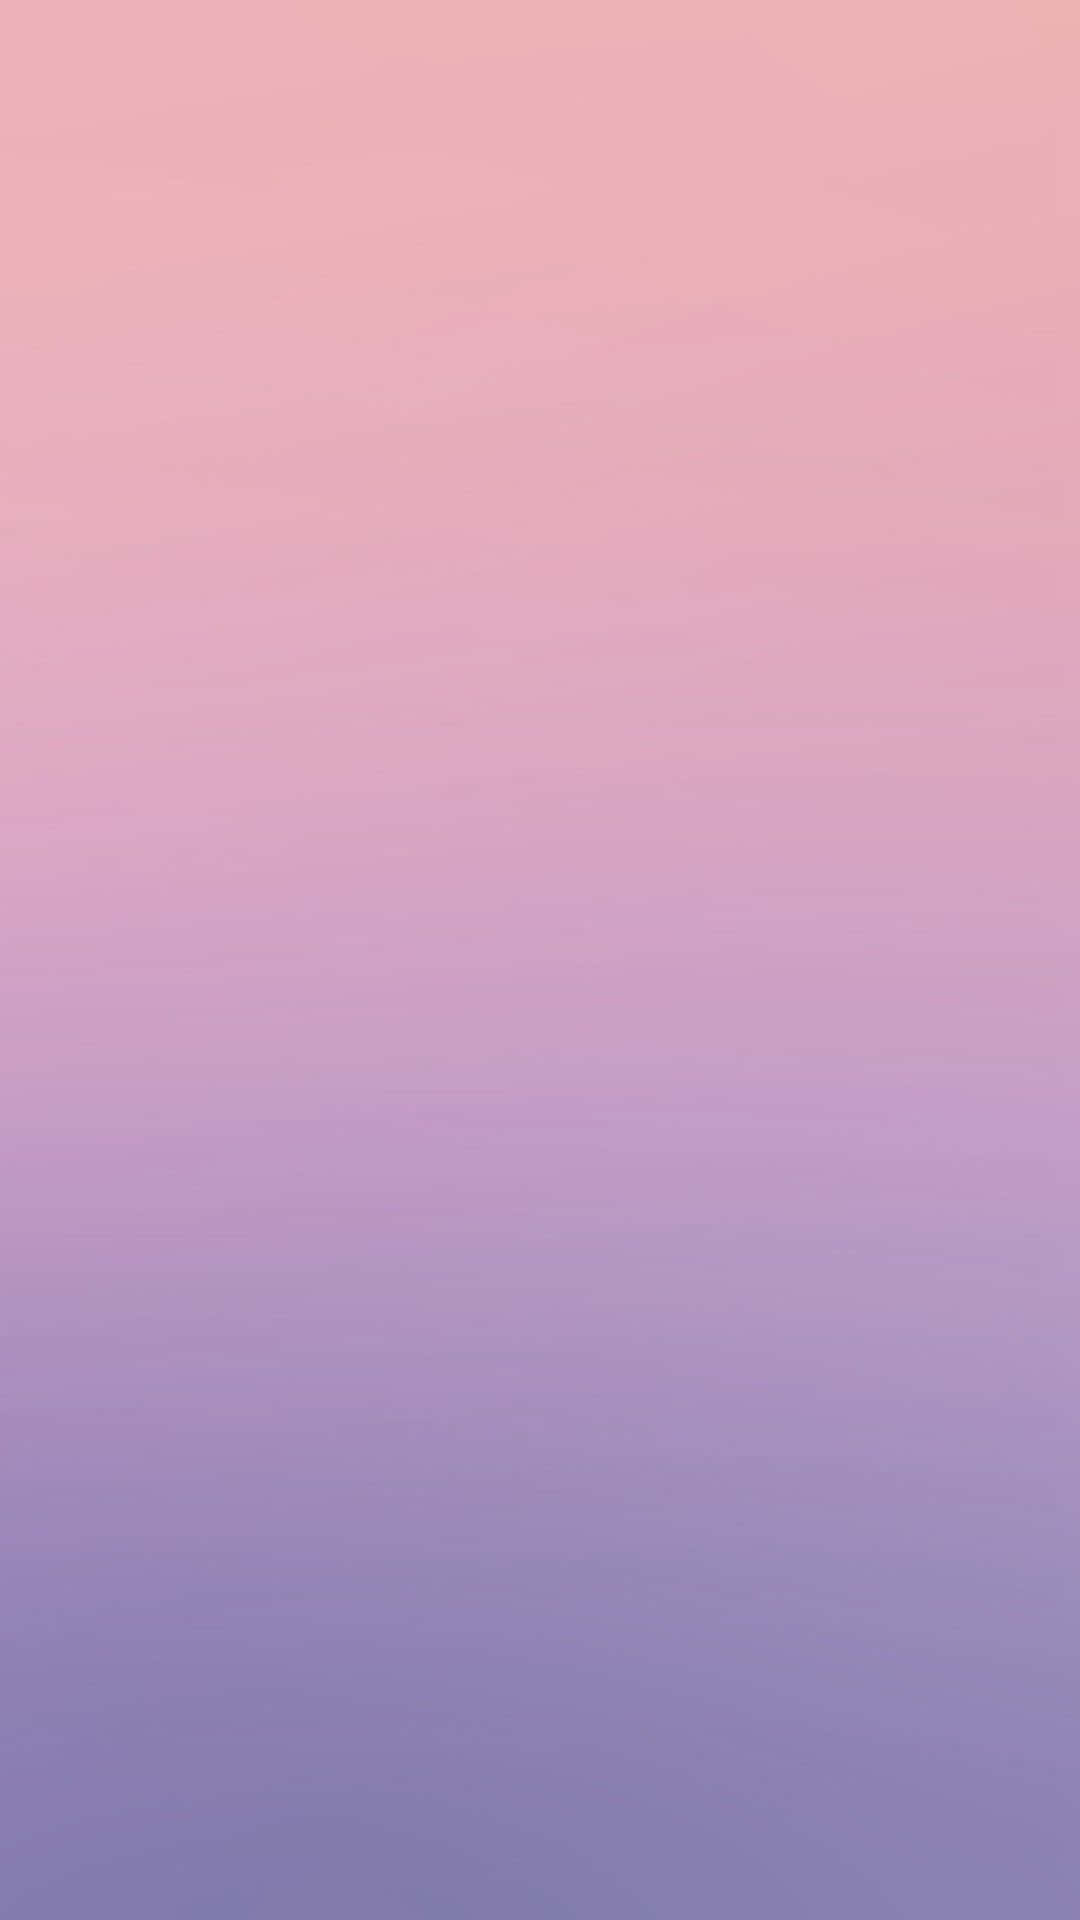 A Pink And Purple Gradient Background Wallpaper